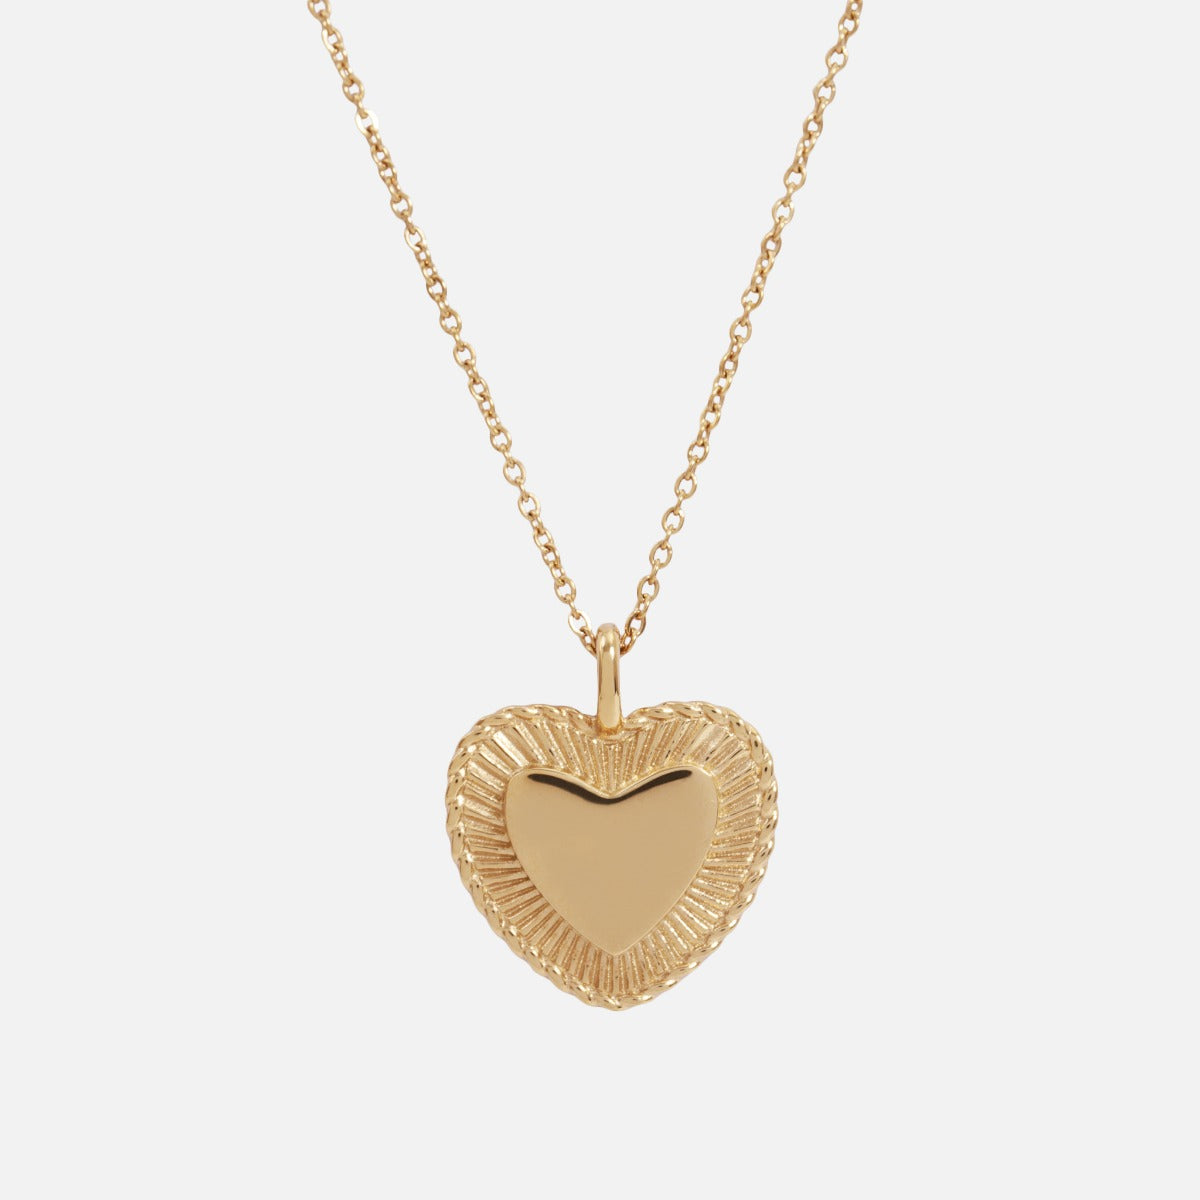 Golden necklace with filigree heart pendant in stainless steel